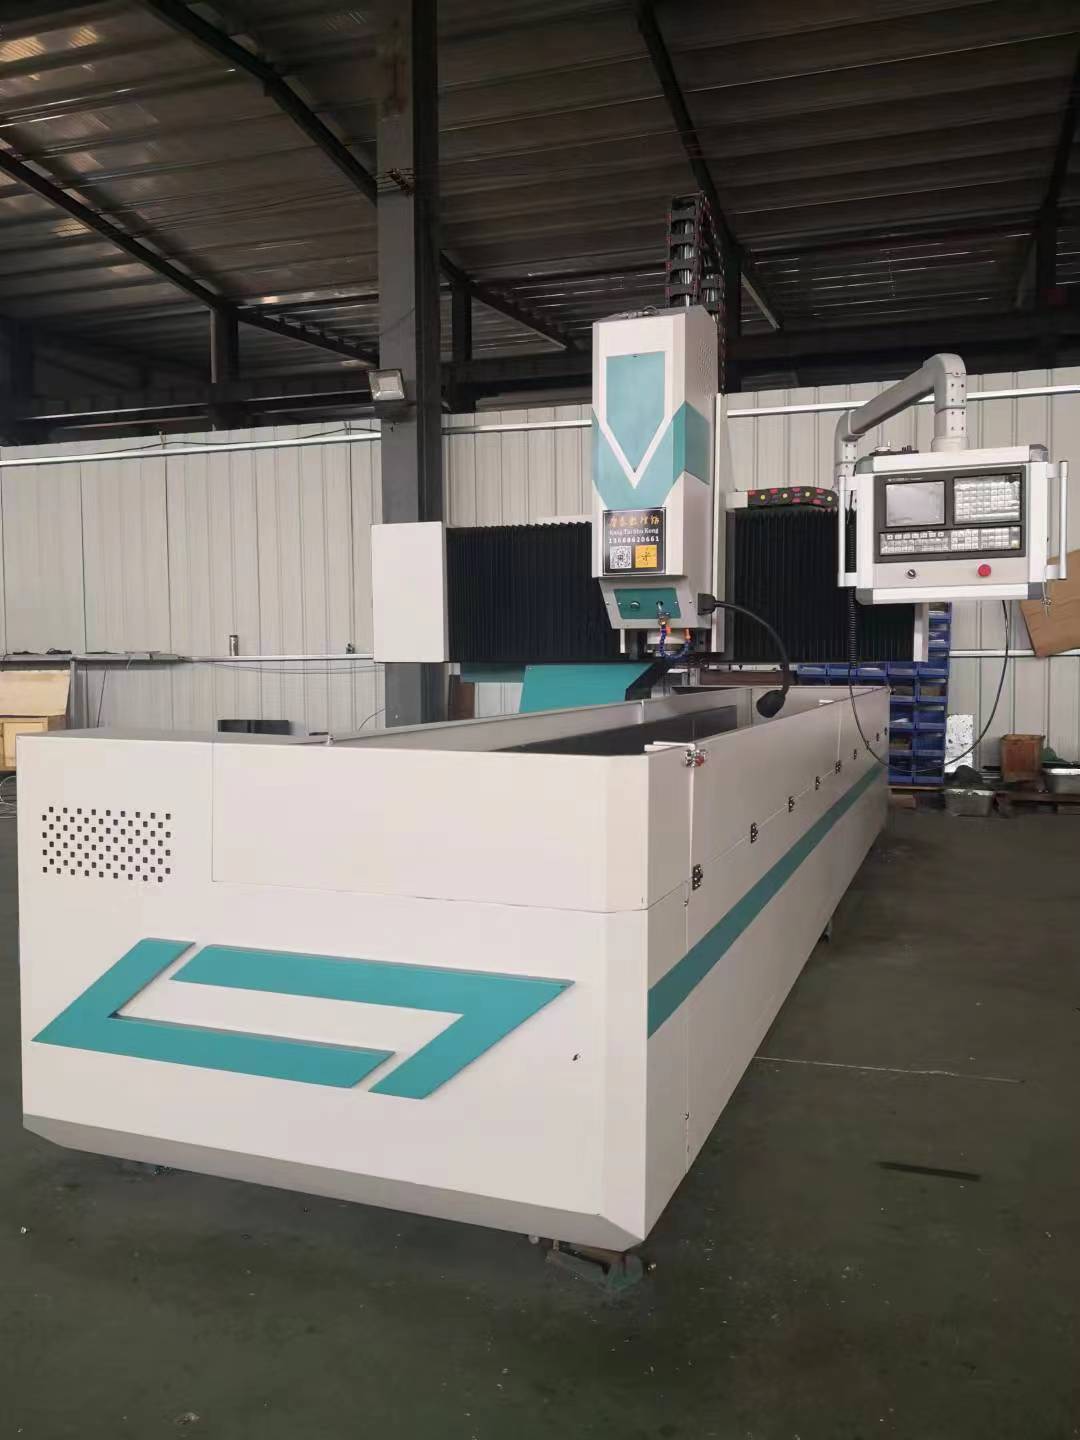 LK-3060 CNC drilling and milling machine